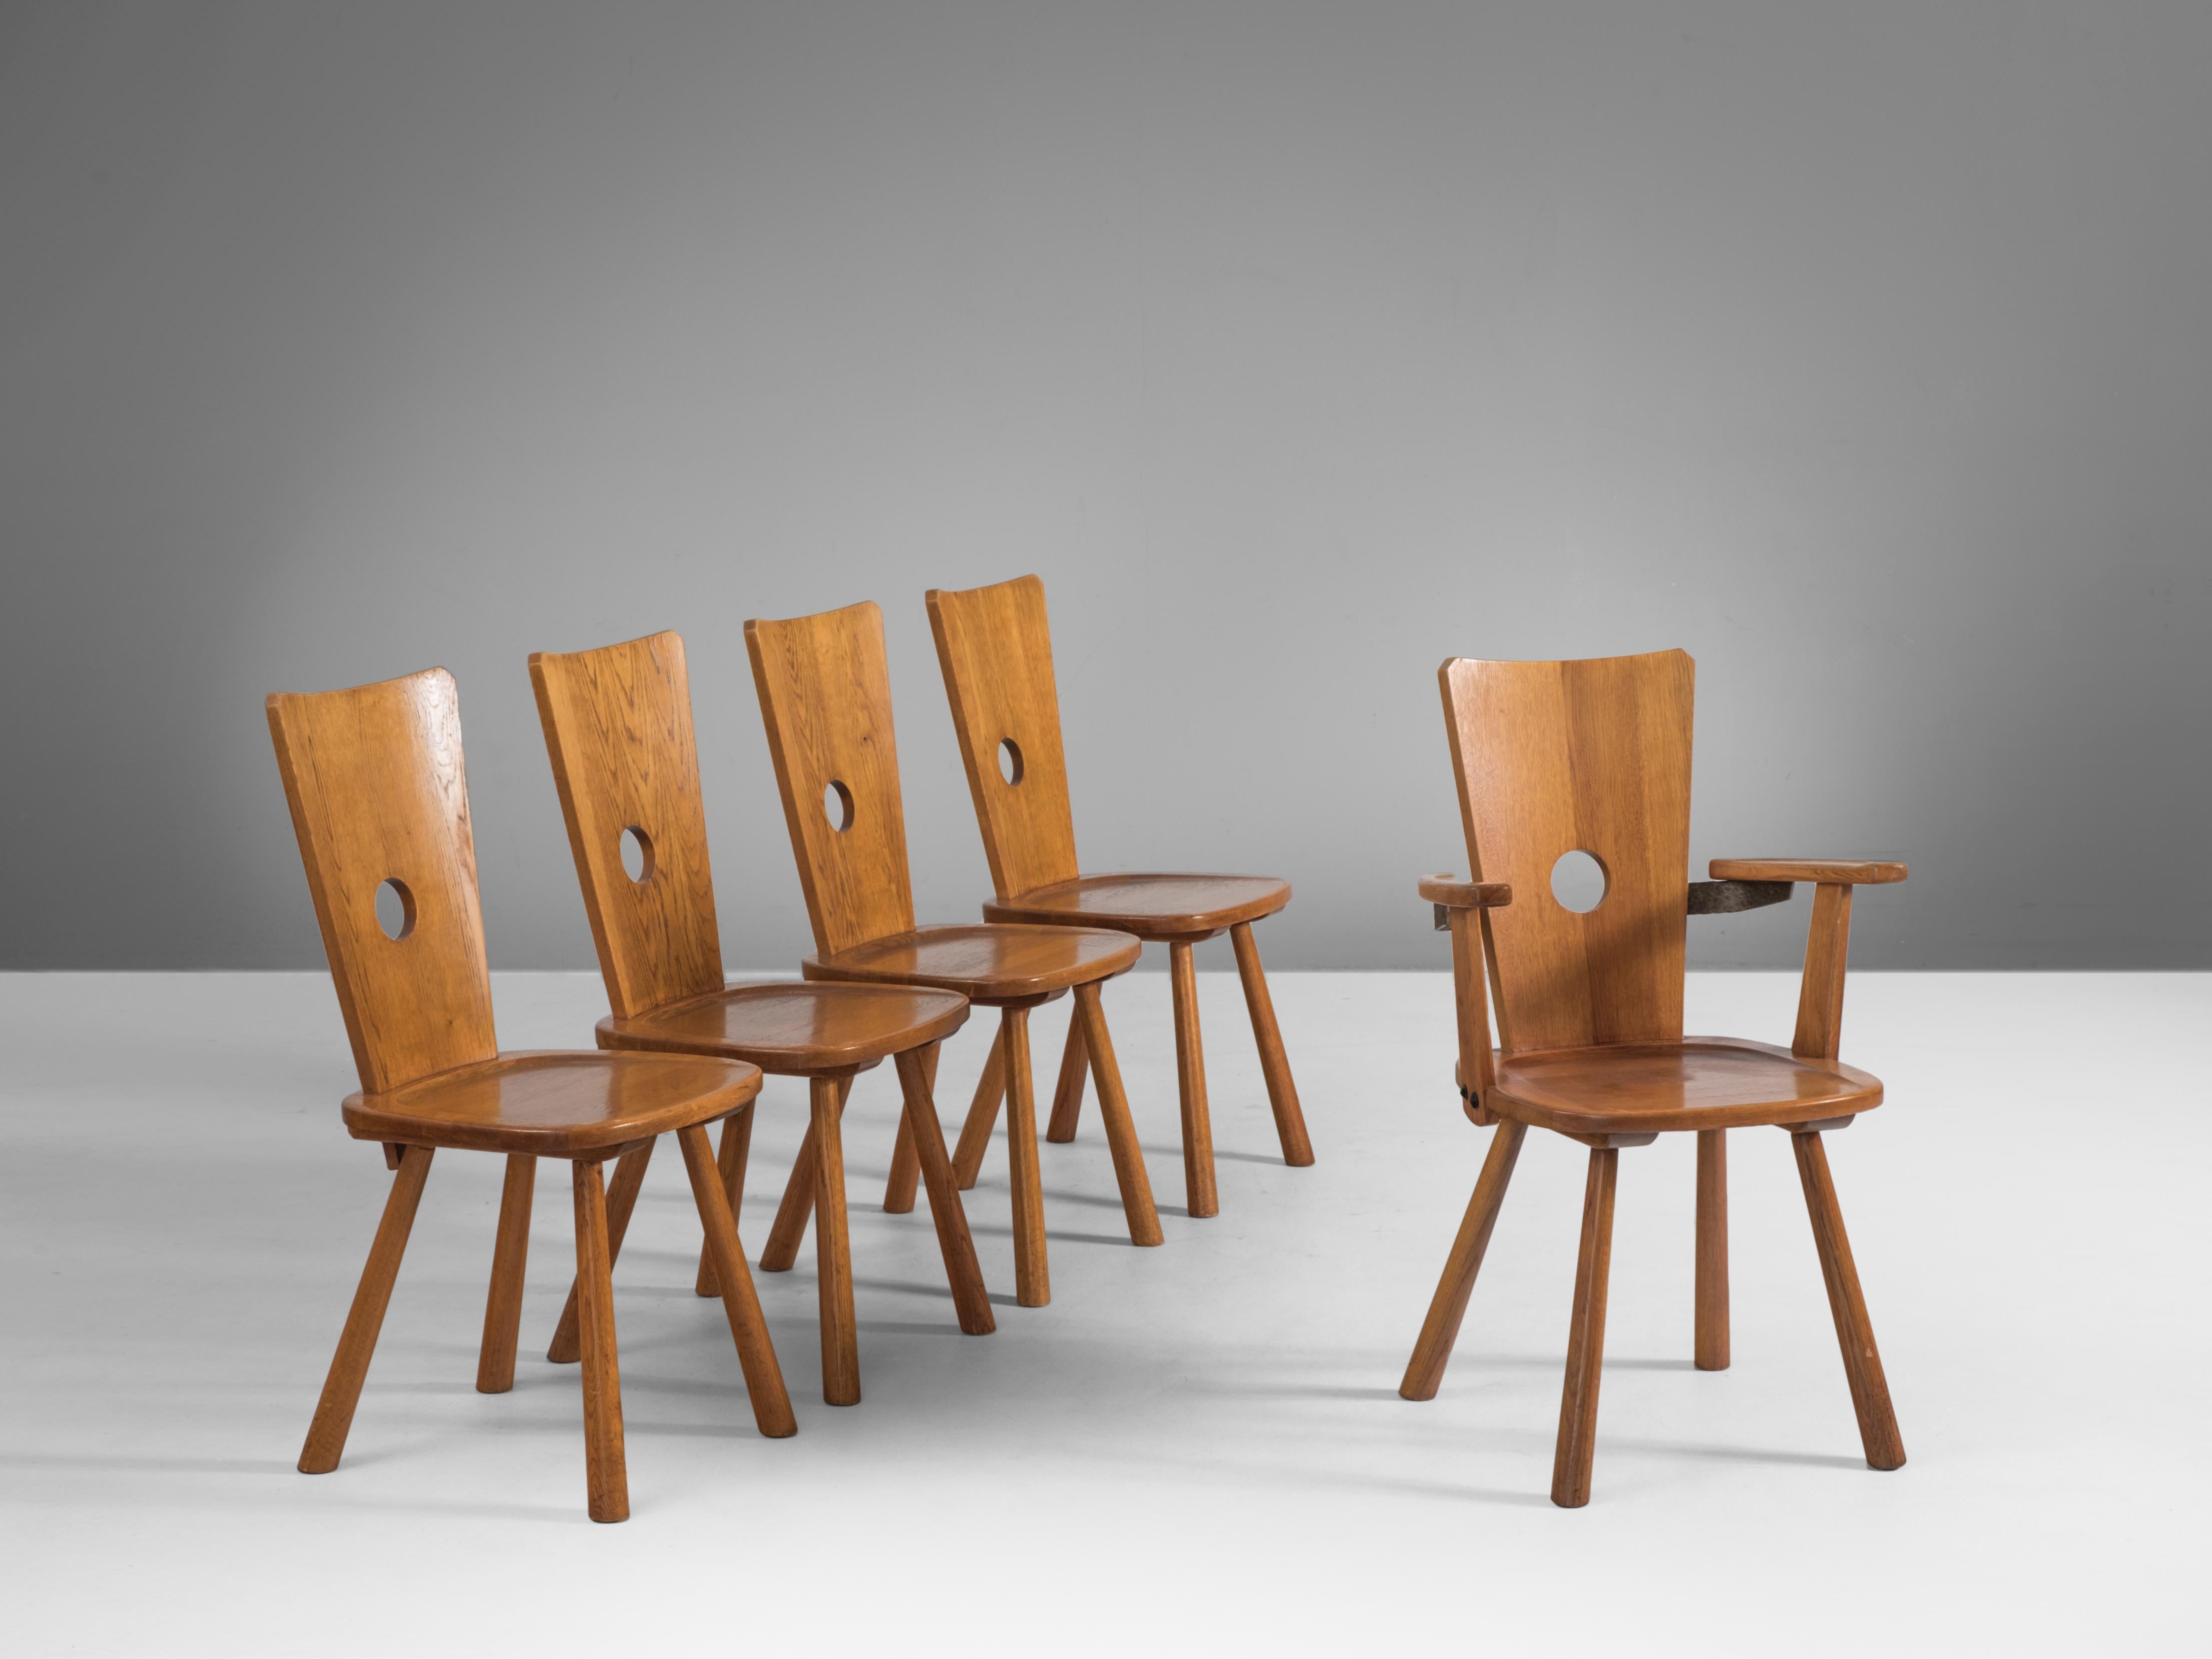 Set of five dining chairs, oak, the Netherlands, 1960s

Set of five solid oak chairs from Dutch origin. This set consists of four chairs and one armchair. The chairs have a distinct design with peculiar shapes and proportions. The design is rustic,